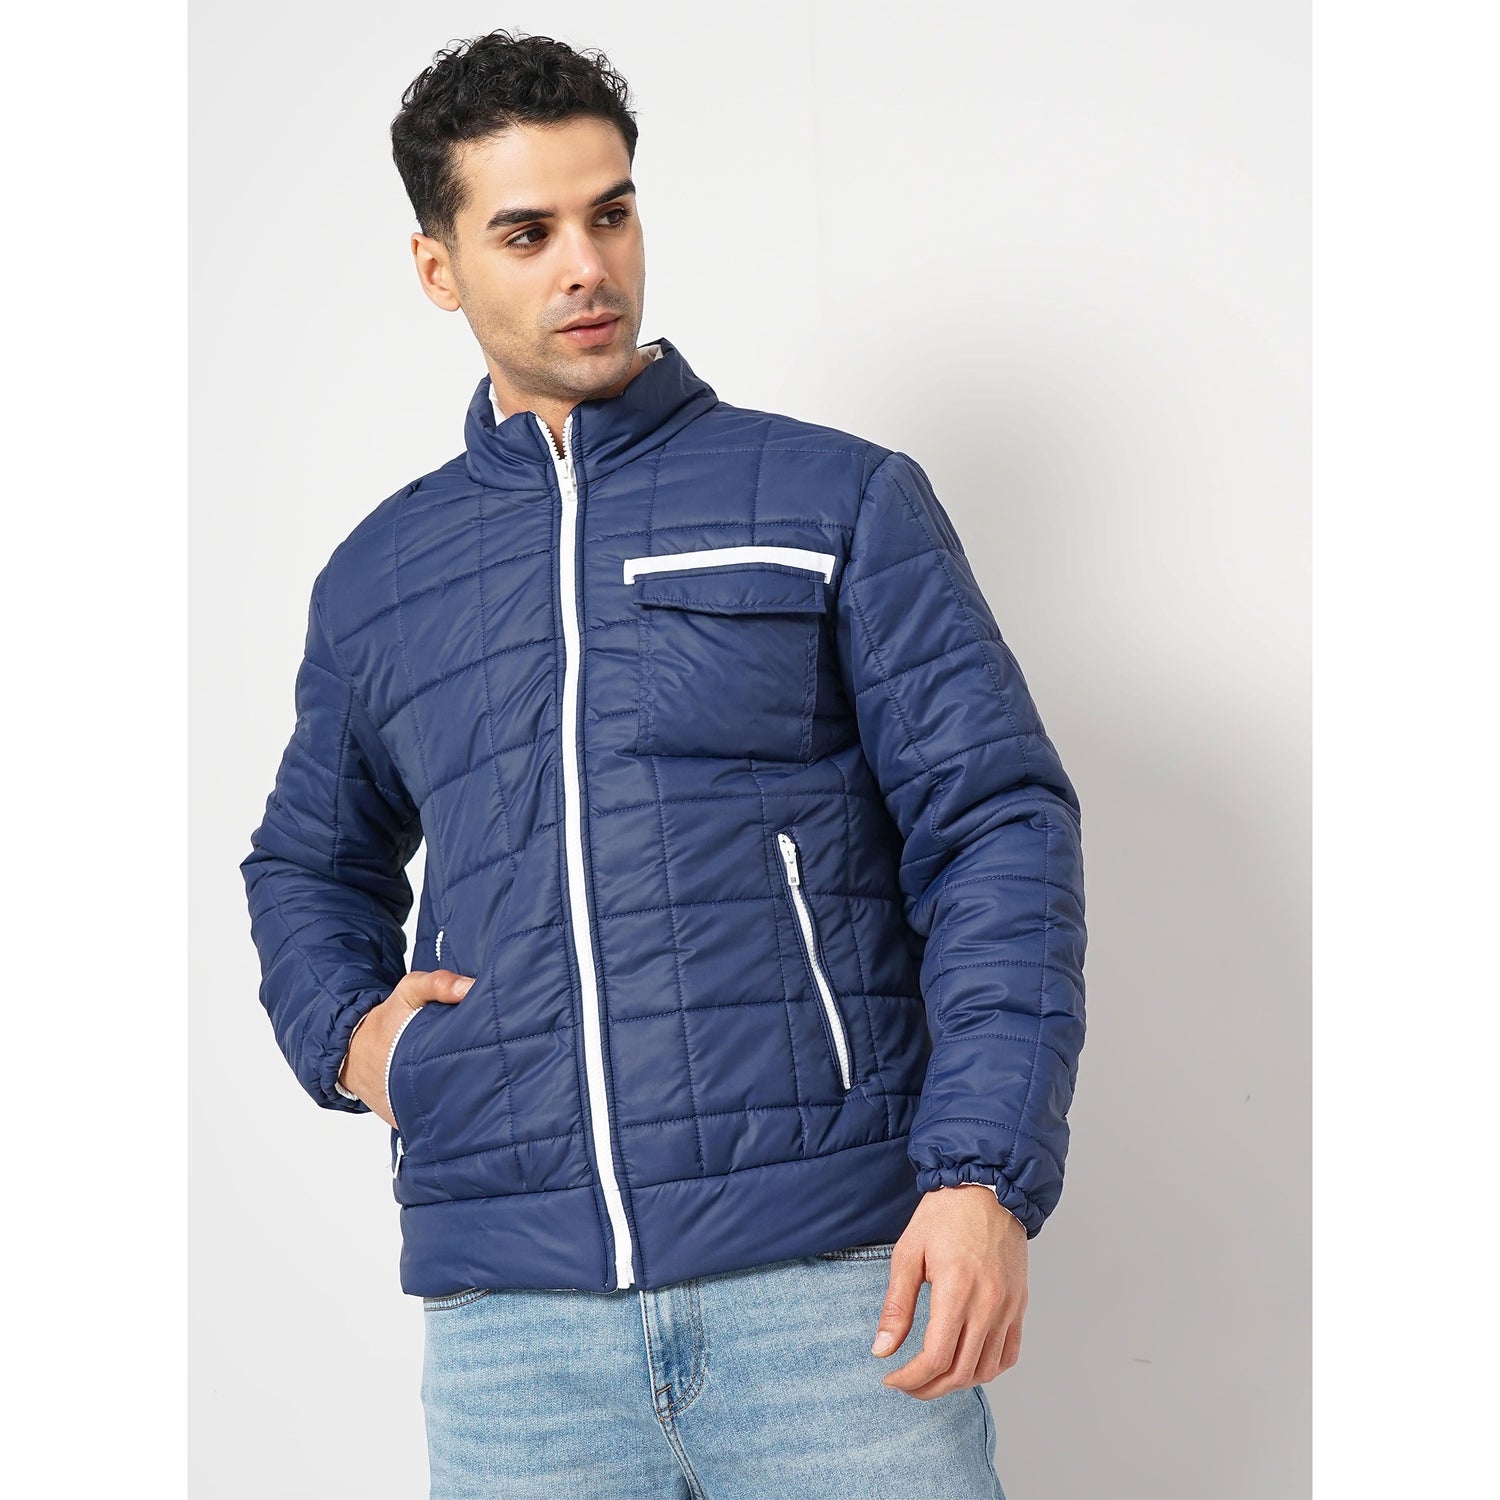 Men's Blue Solid Regular Fit Polyester Puffer Jacket (FUPOLO)